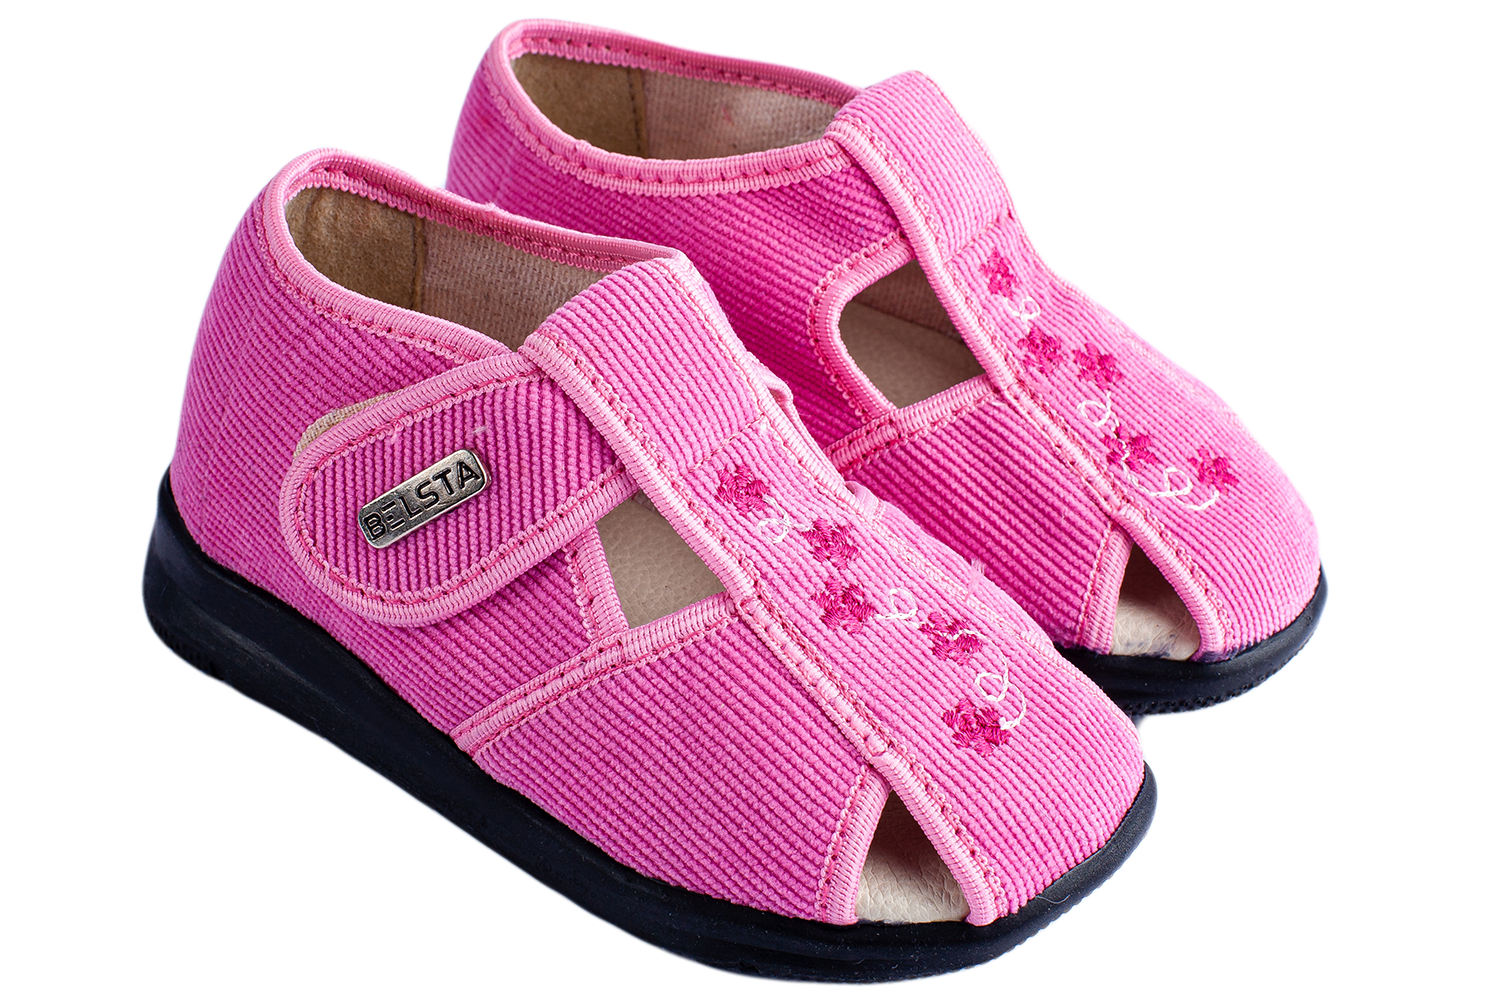 Children's sandals BELSTA of corduroy with embroidery - 1